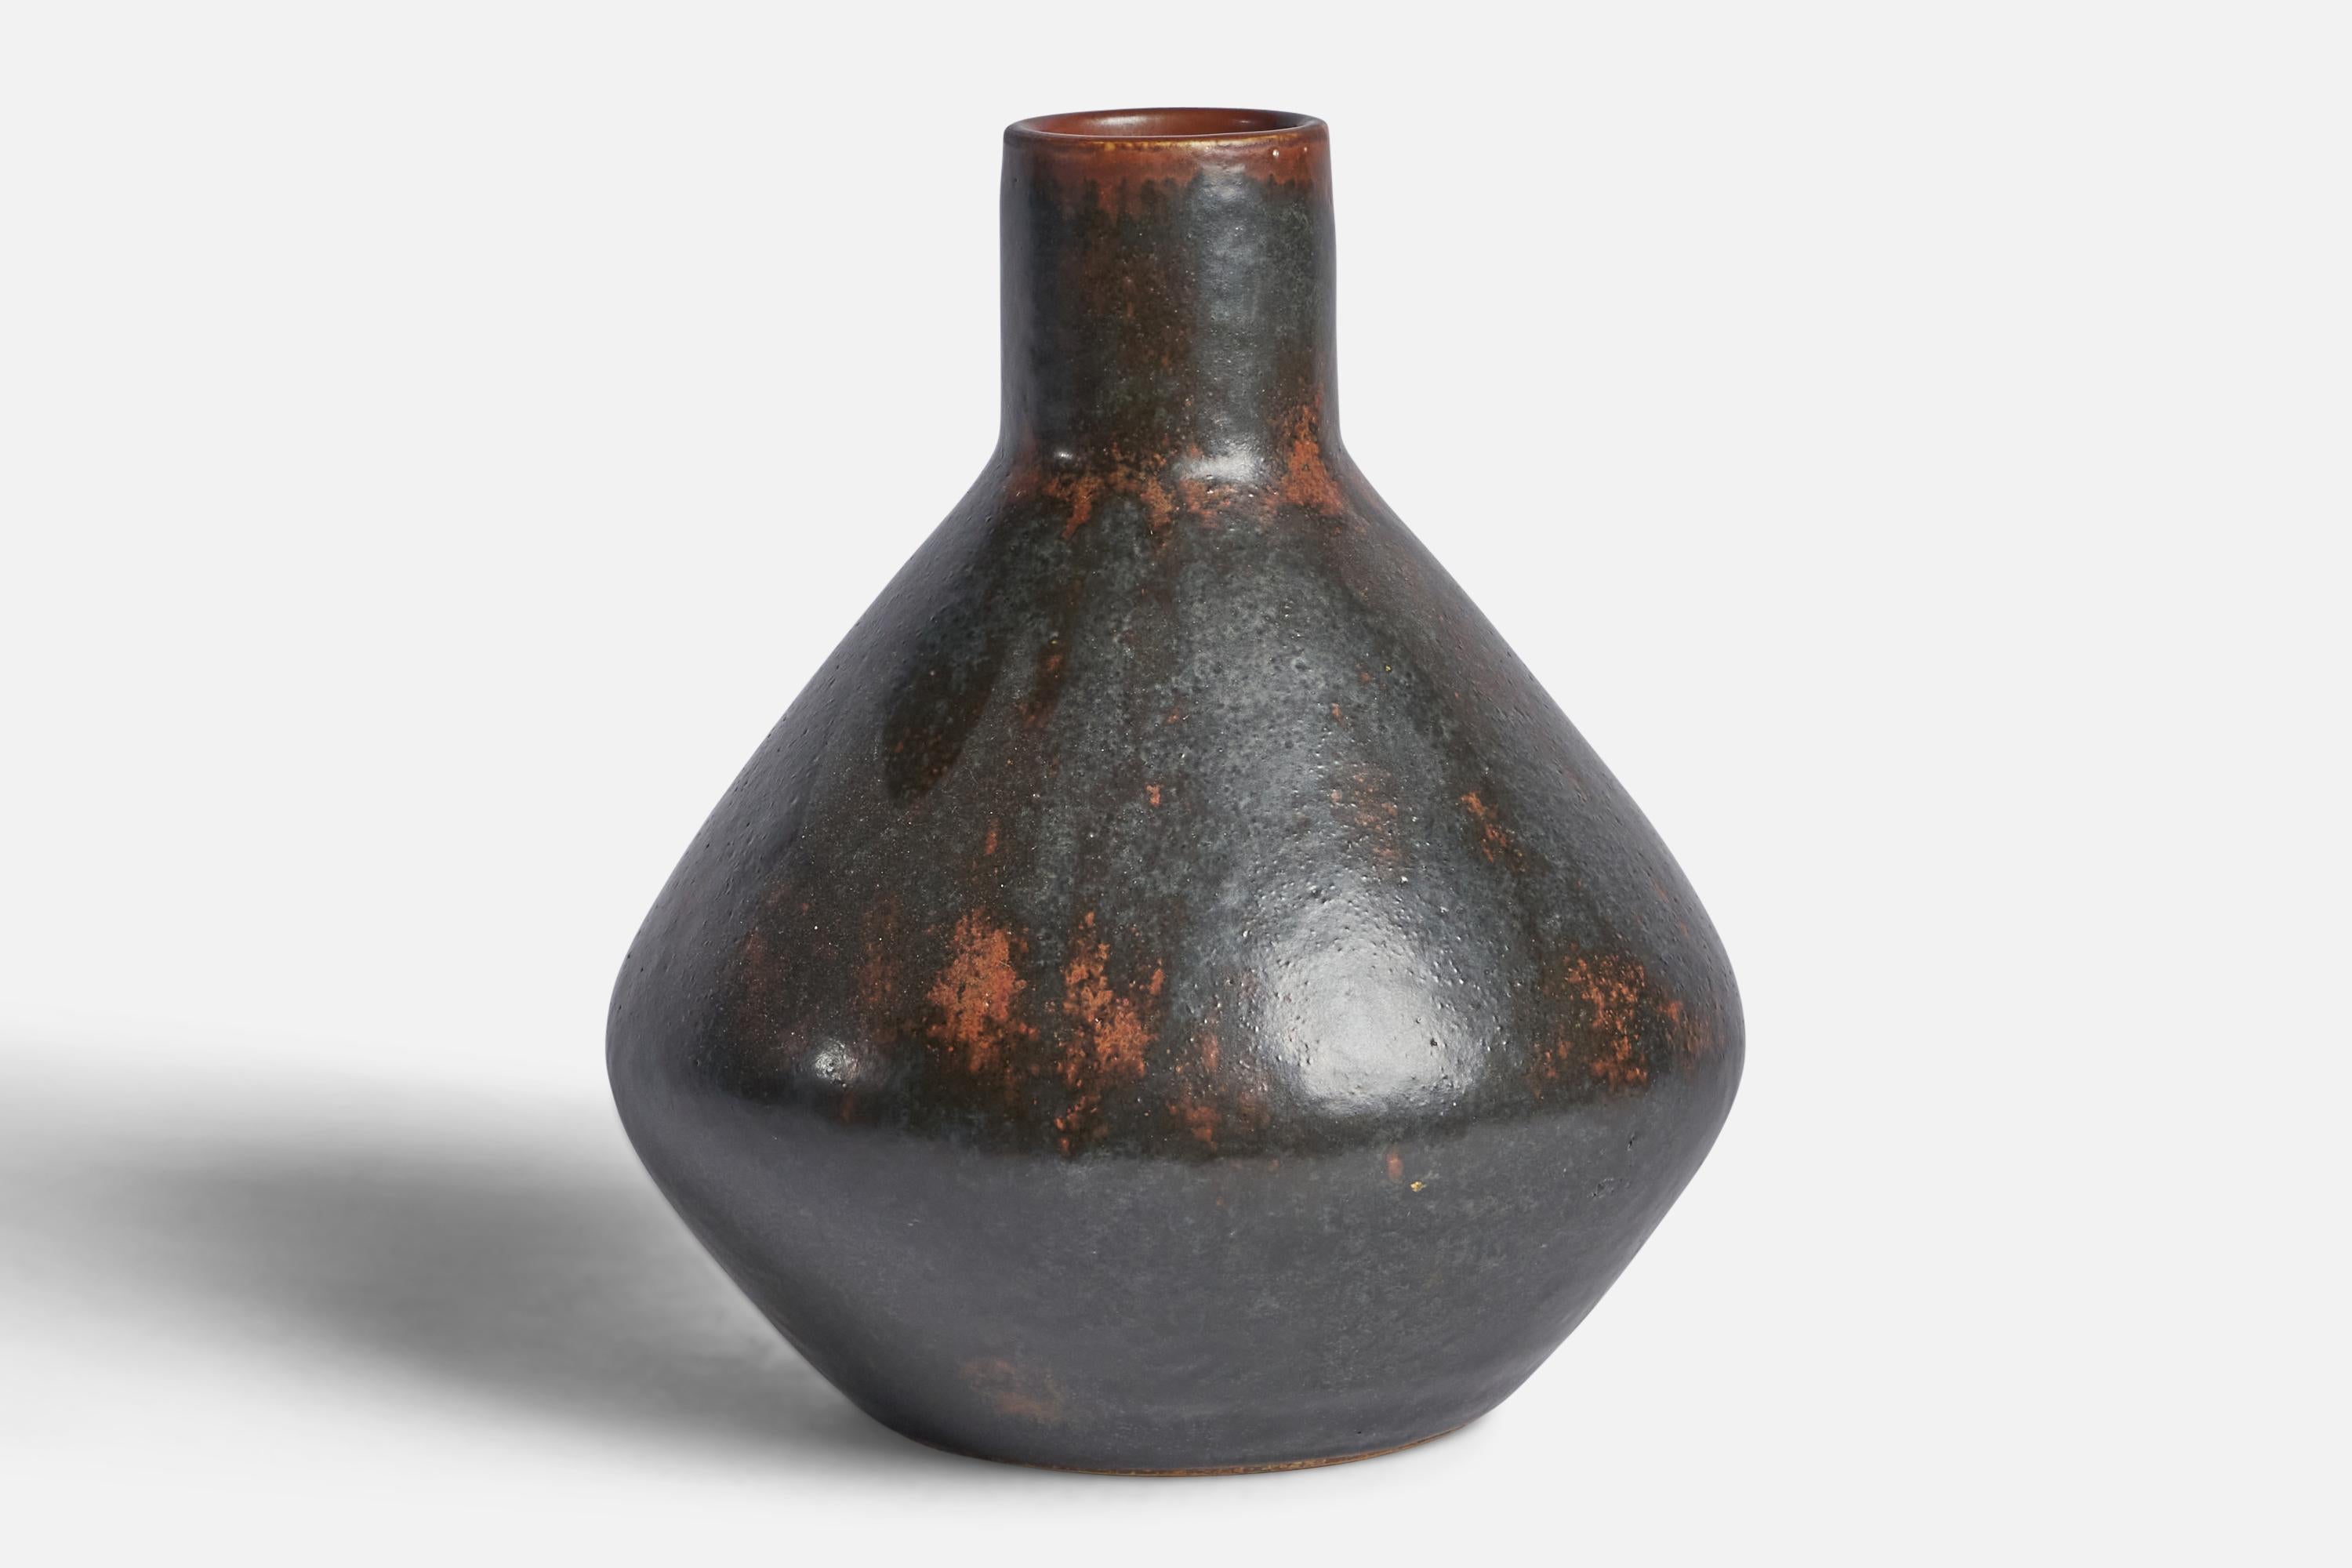 A sizeable grey-glazed stoneware vase designed by Carl-Harry Stålhane and produced by Rörstrand, Sweden, 1950s.